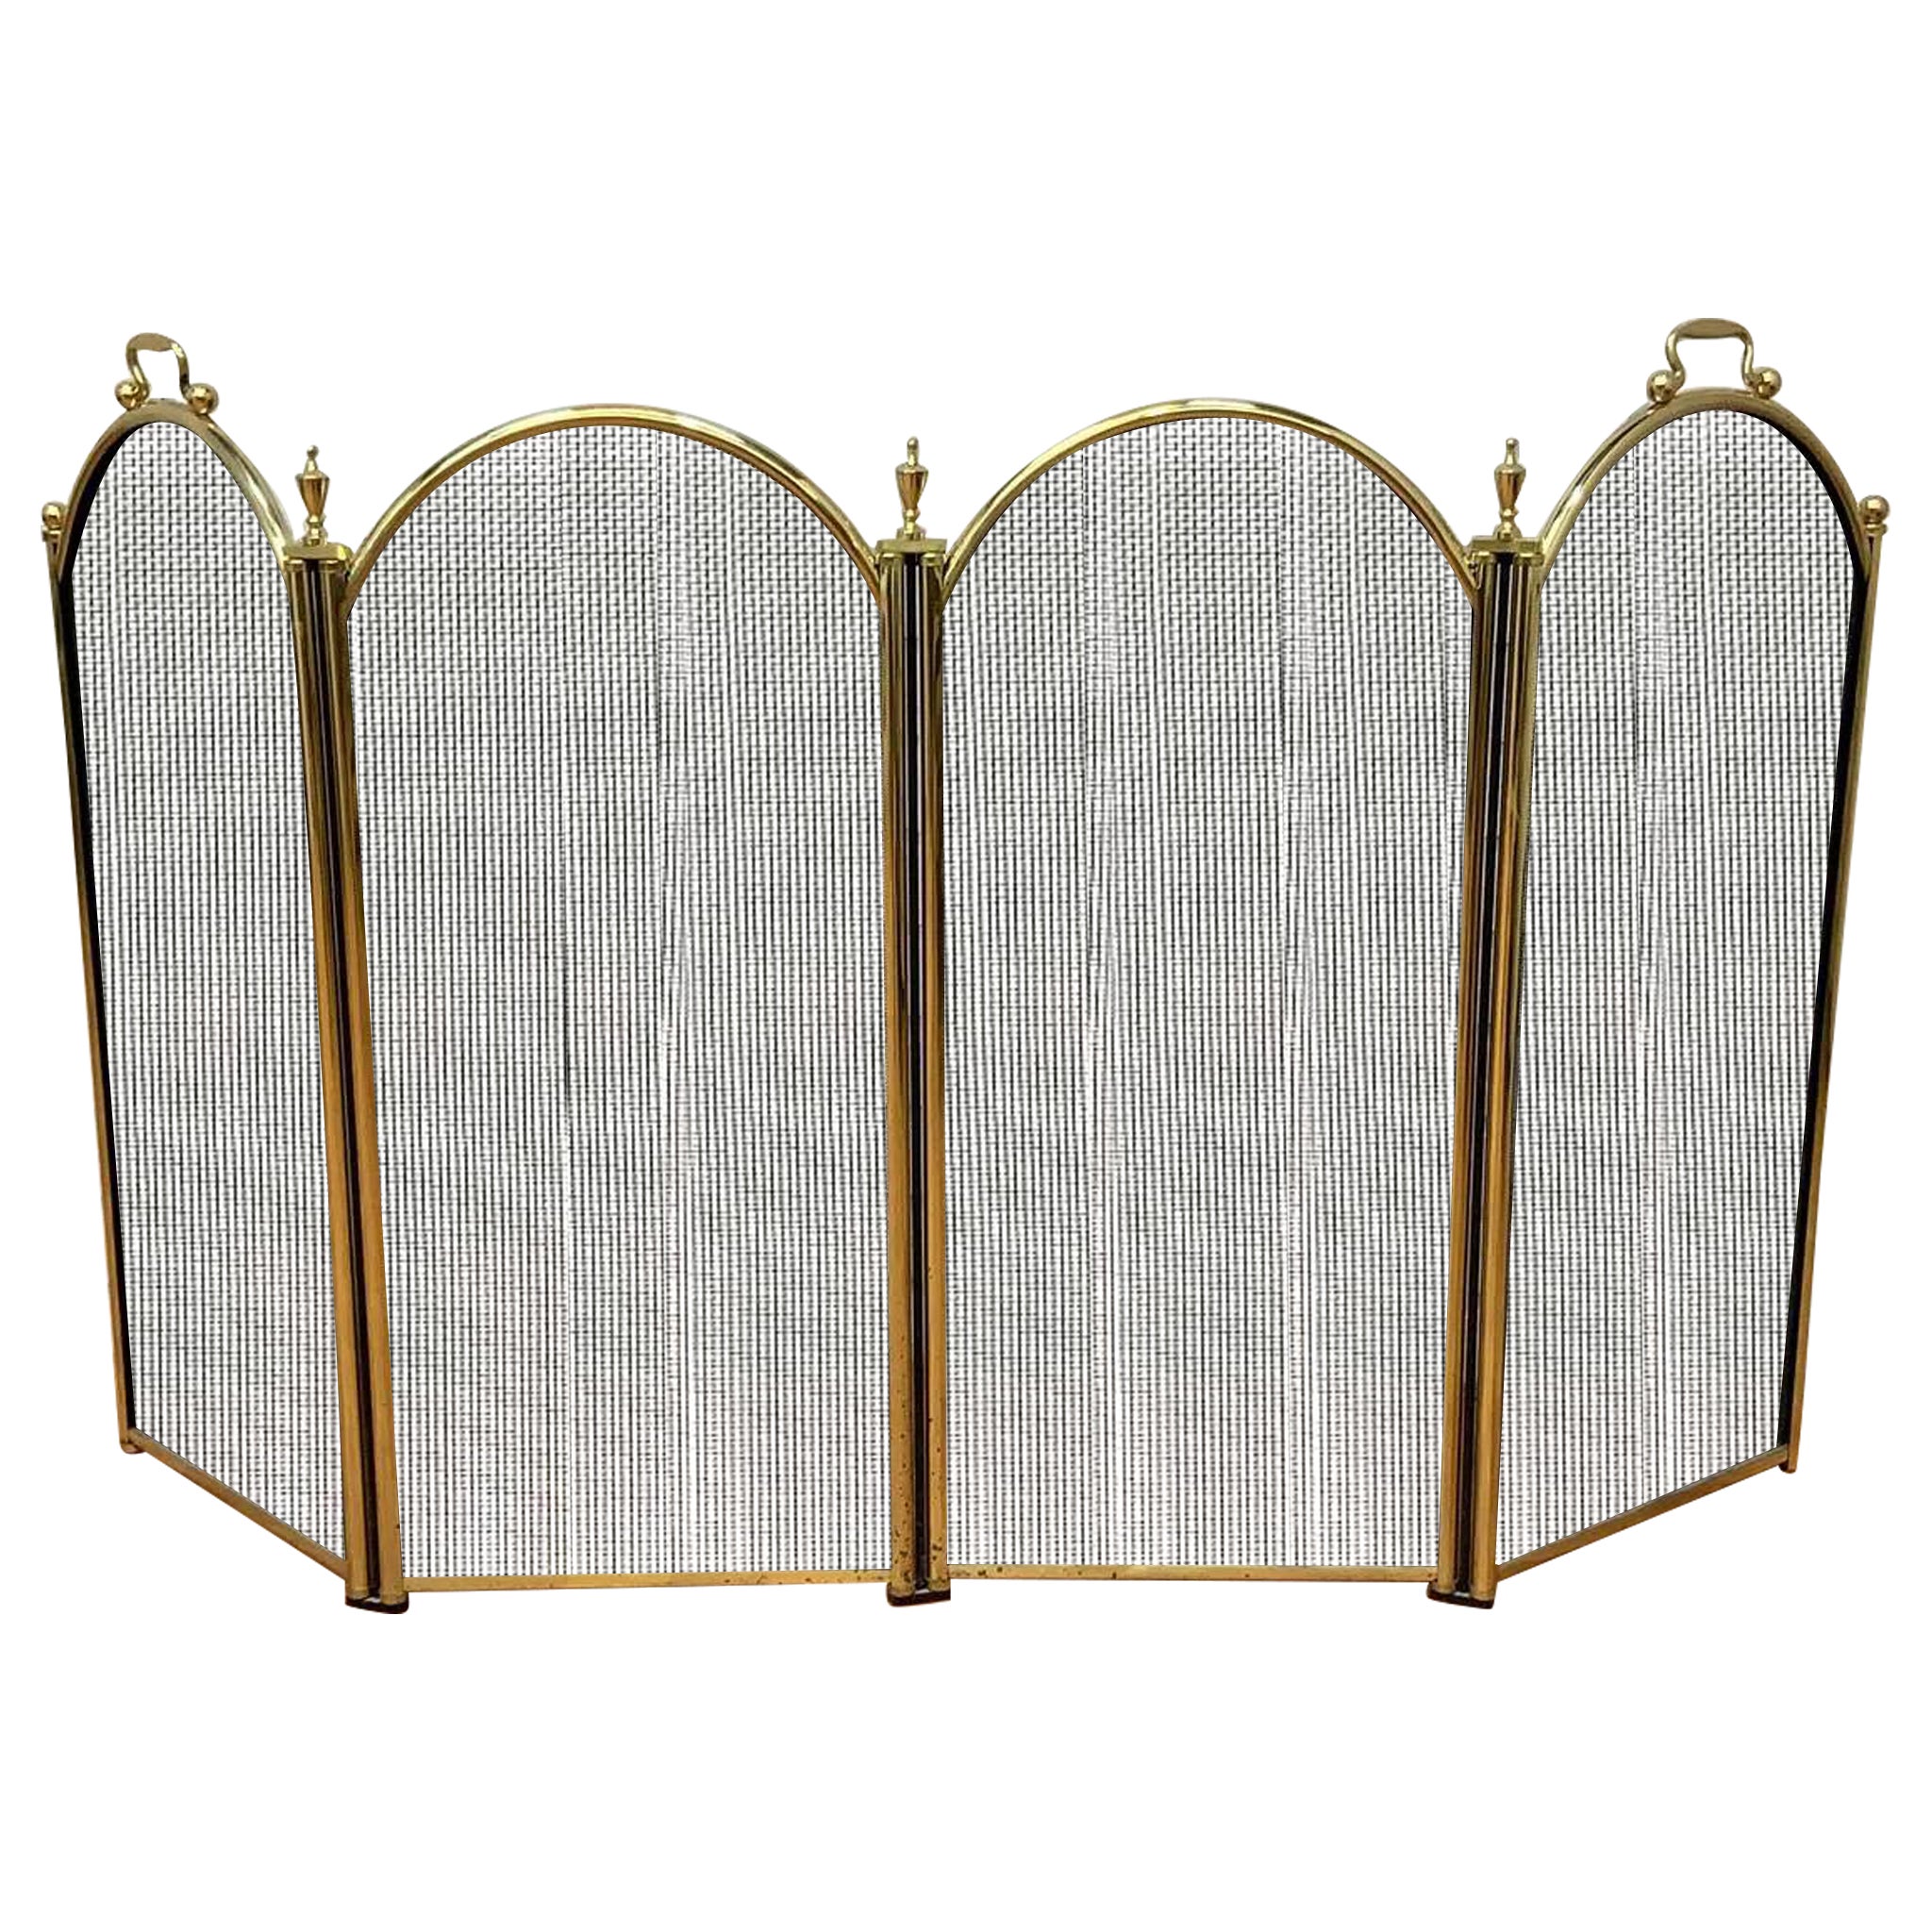 Vintage Mid Century Mesh with Brass Ball Handles & Finials Folding Hearth Screen For Sale